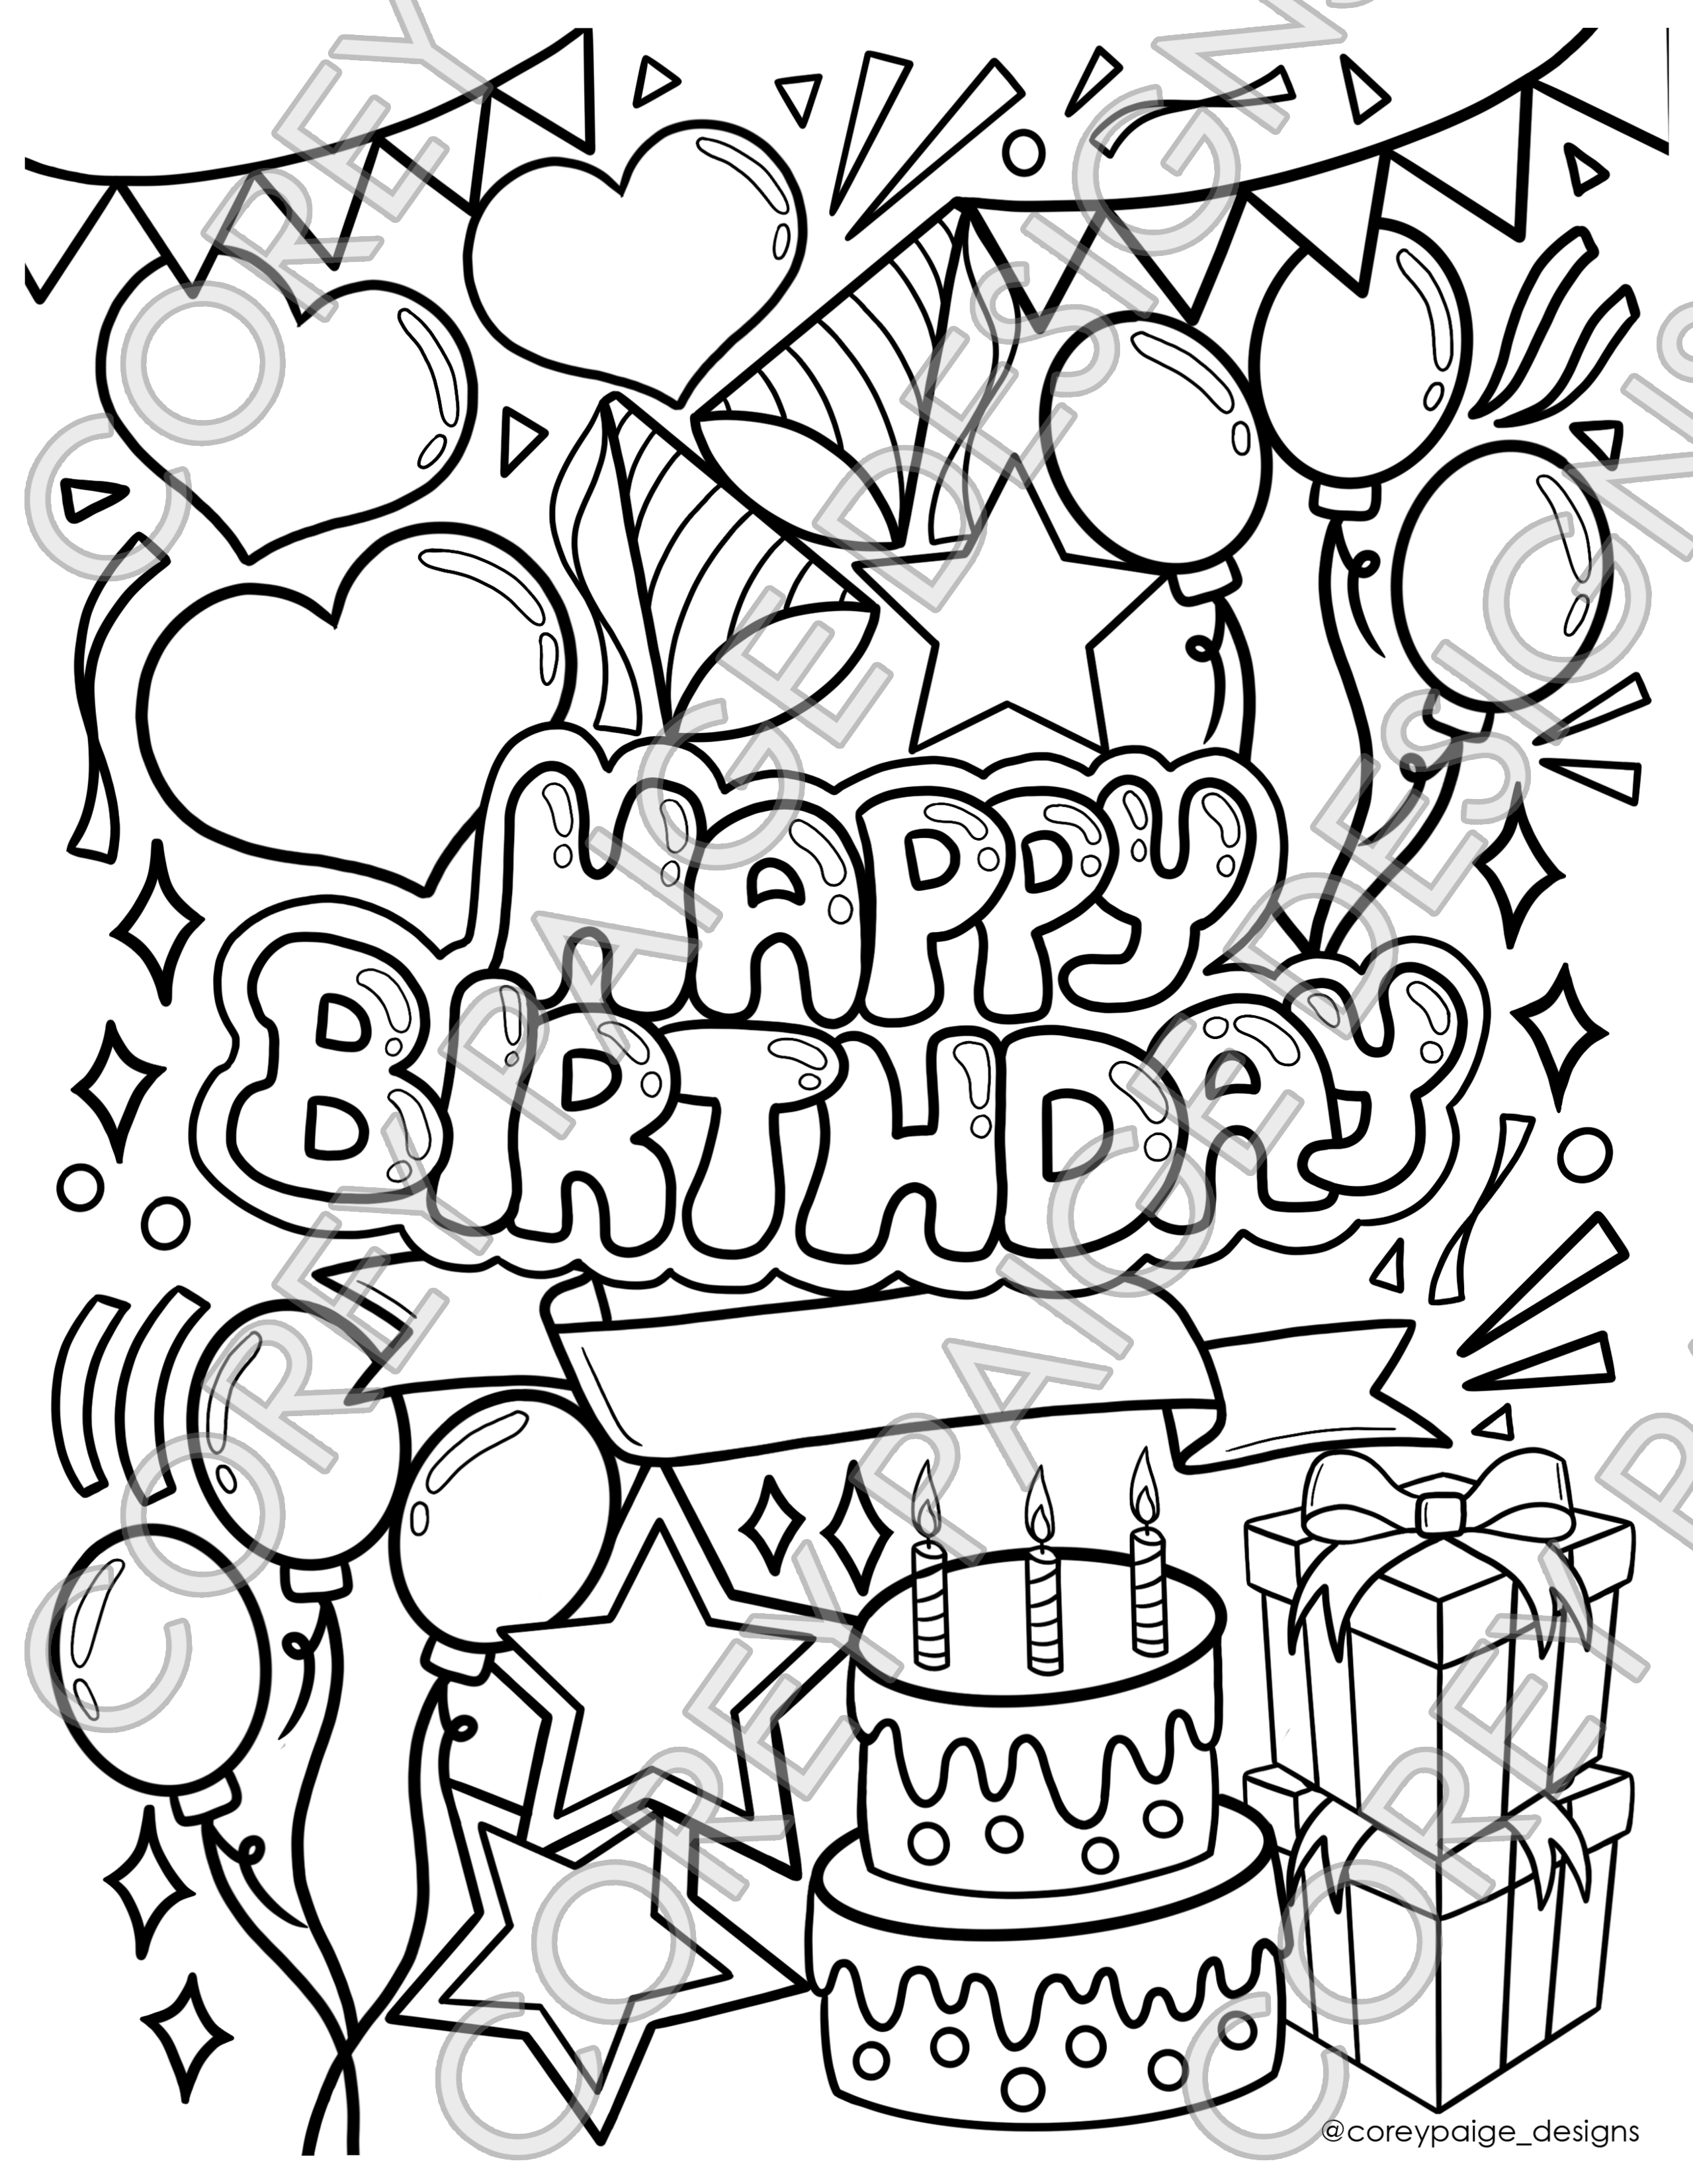 printable-birthday-coloring-pages-customize-and-print